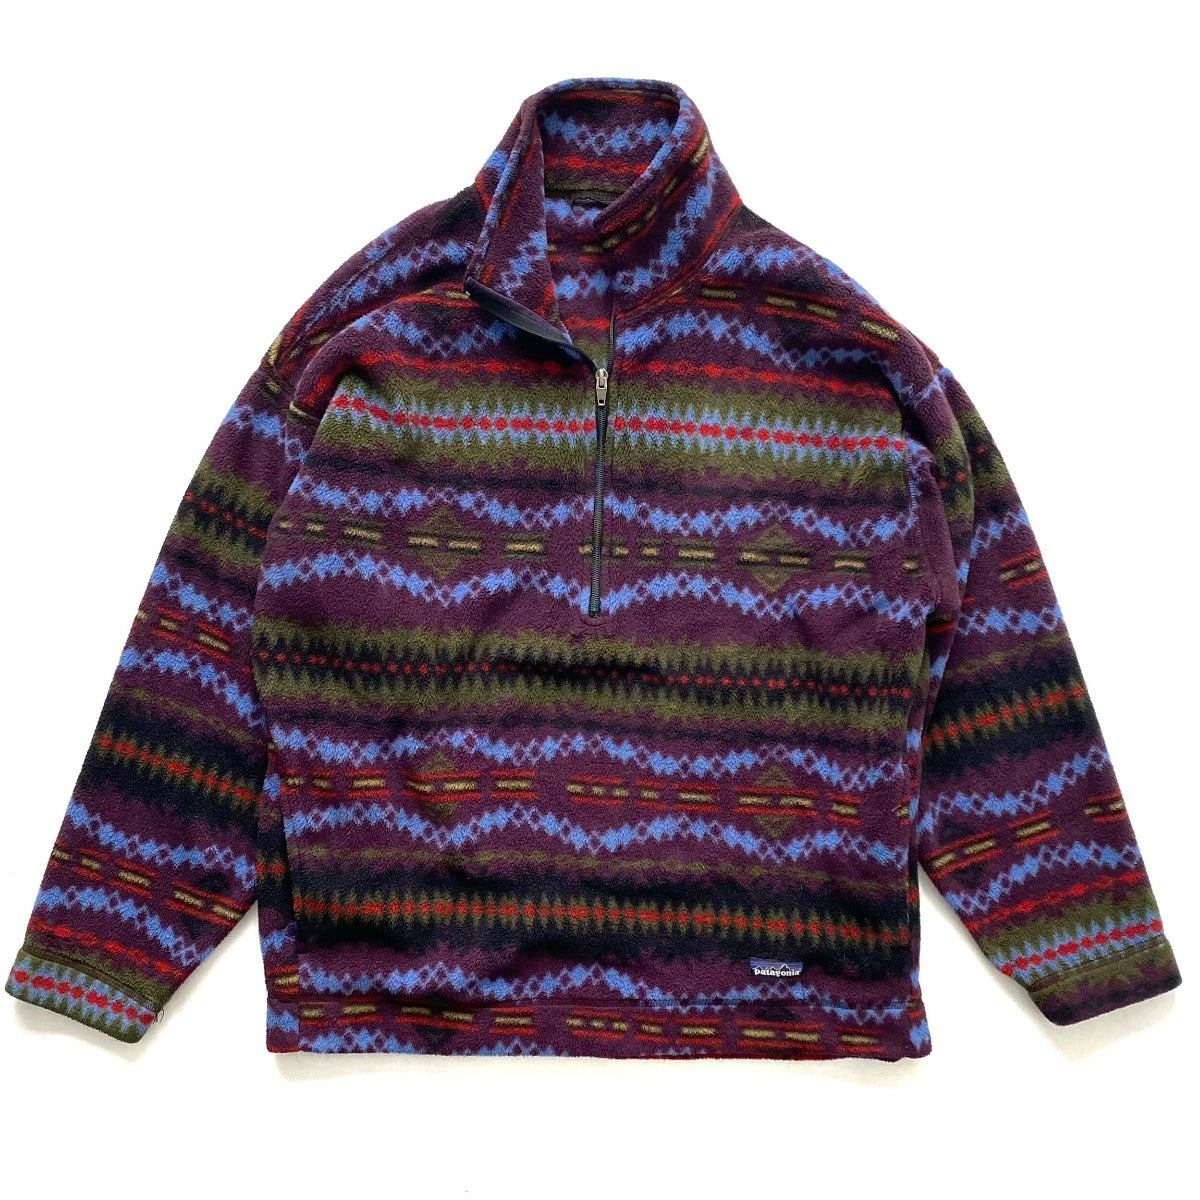 The Thirty-First Aztec – 1994 Vintage Fleece Fall Synchilla Pullover Patagonia